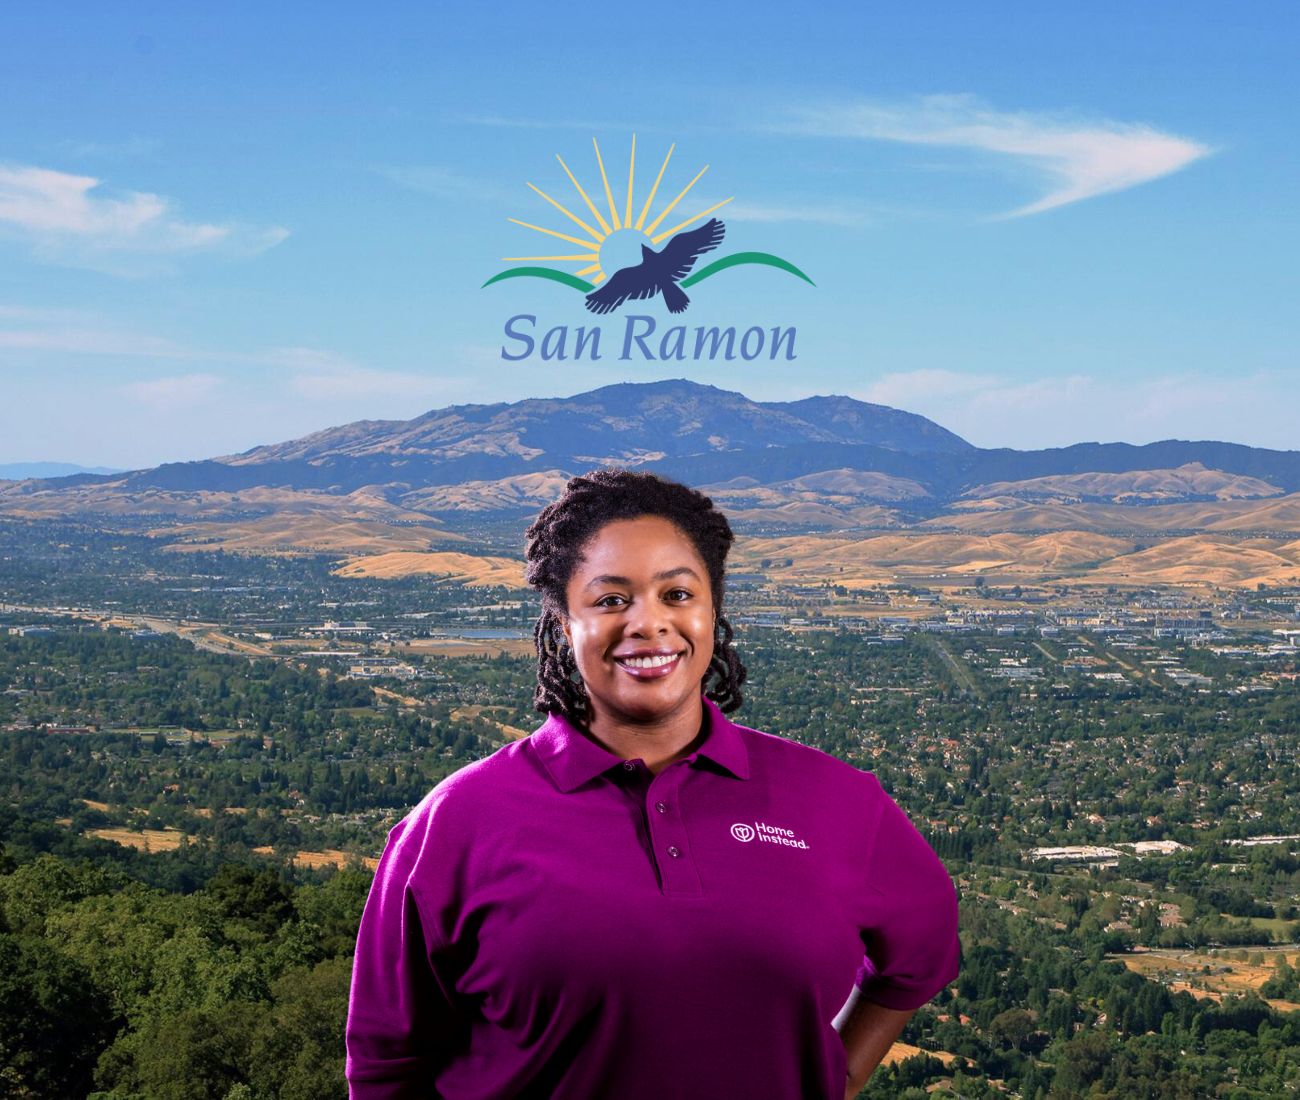 Home Instead caregiver with San Ramon California in the background